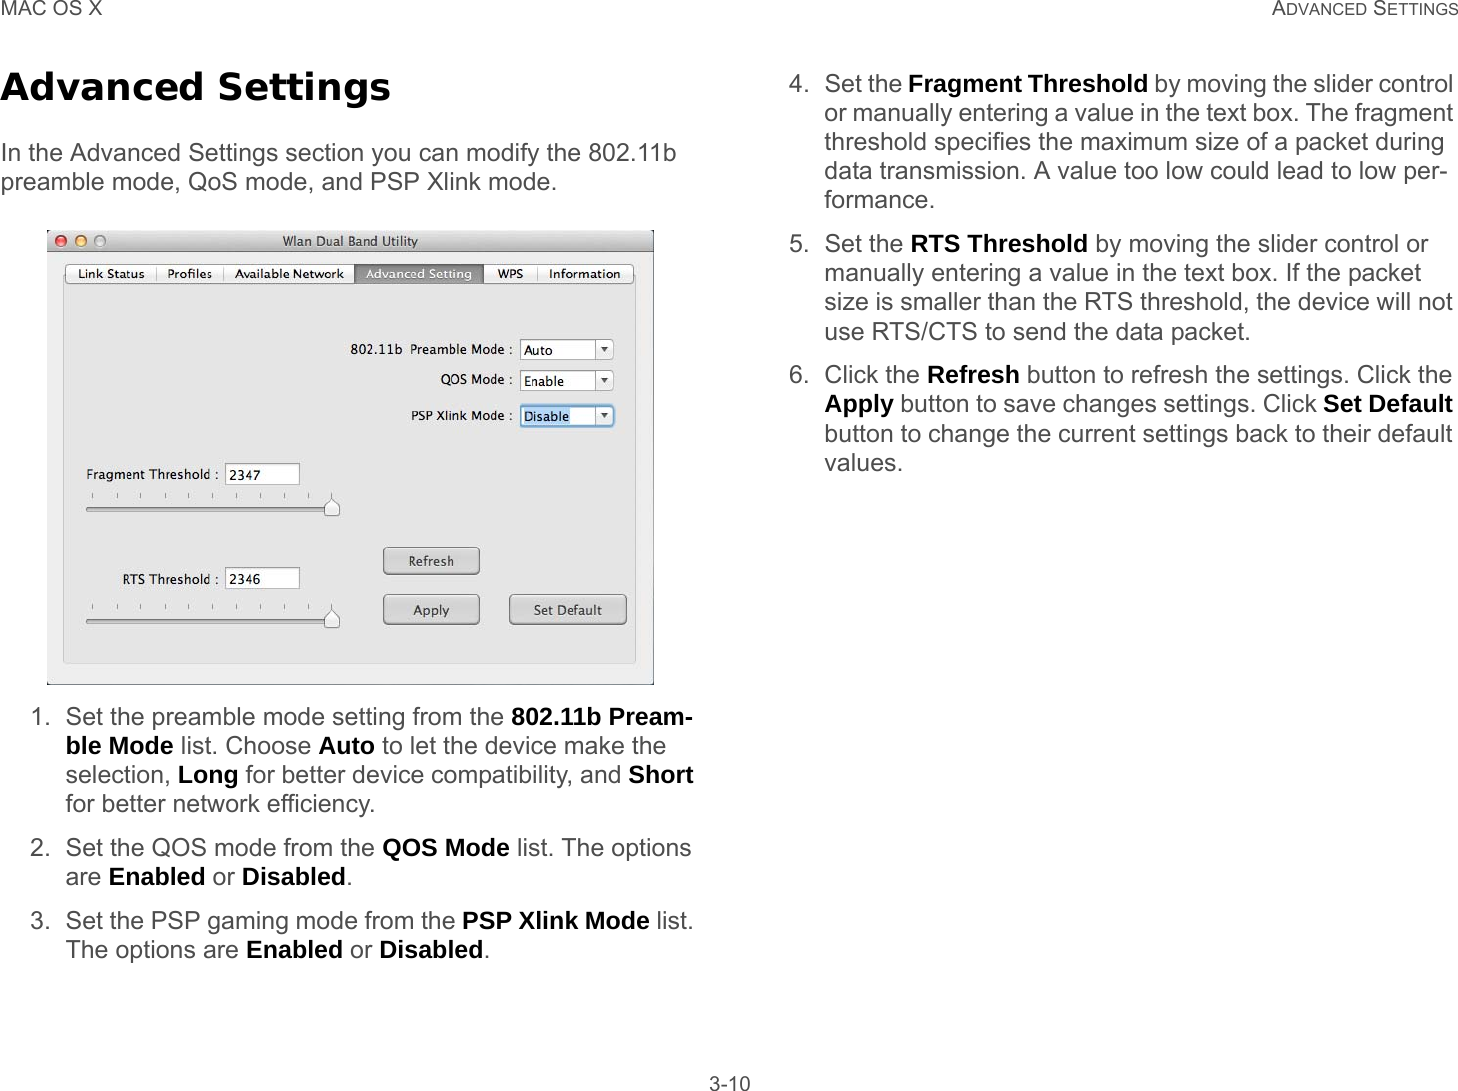 MAC OS X ADVANCED SETTINGS 3-10Advanced SettingsIn the Advanced Settings section you can modify the 802.11b preamble mode, QoS mode, and PSP Xlink mode.1. Set the preamble mode setting from the 802.11b Pream-ble Mode list. Choose Auto to let the device make the selection, Long for better device compatibility, and Short for better network efficiency.2. Set the QOS mode from the QOS Mode list. The options are Enabled or Disabled.3. Set the PSP gaming mode from the PSP Xlink Mode list. The options are Enabled or Disabled.4. Set the Fragment Threshold by moving the slider control or manually entering a value in the text box. The fragment threshold specifies the maximum size of a packet during data transmission. A value too low could lead to low per-formance. 5. Set the RTS Threshold by moving the slider control or manually entering a value in the text box. If the packet size is smaller than the RTS threshold, the device will not use RTS/CTS to send the data packet. 6. Click the Refresh button to refresh the settings. Click the Apply button to save changes settings. Click Set Default button to change the current settings back to their default values. 